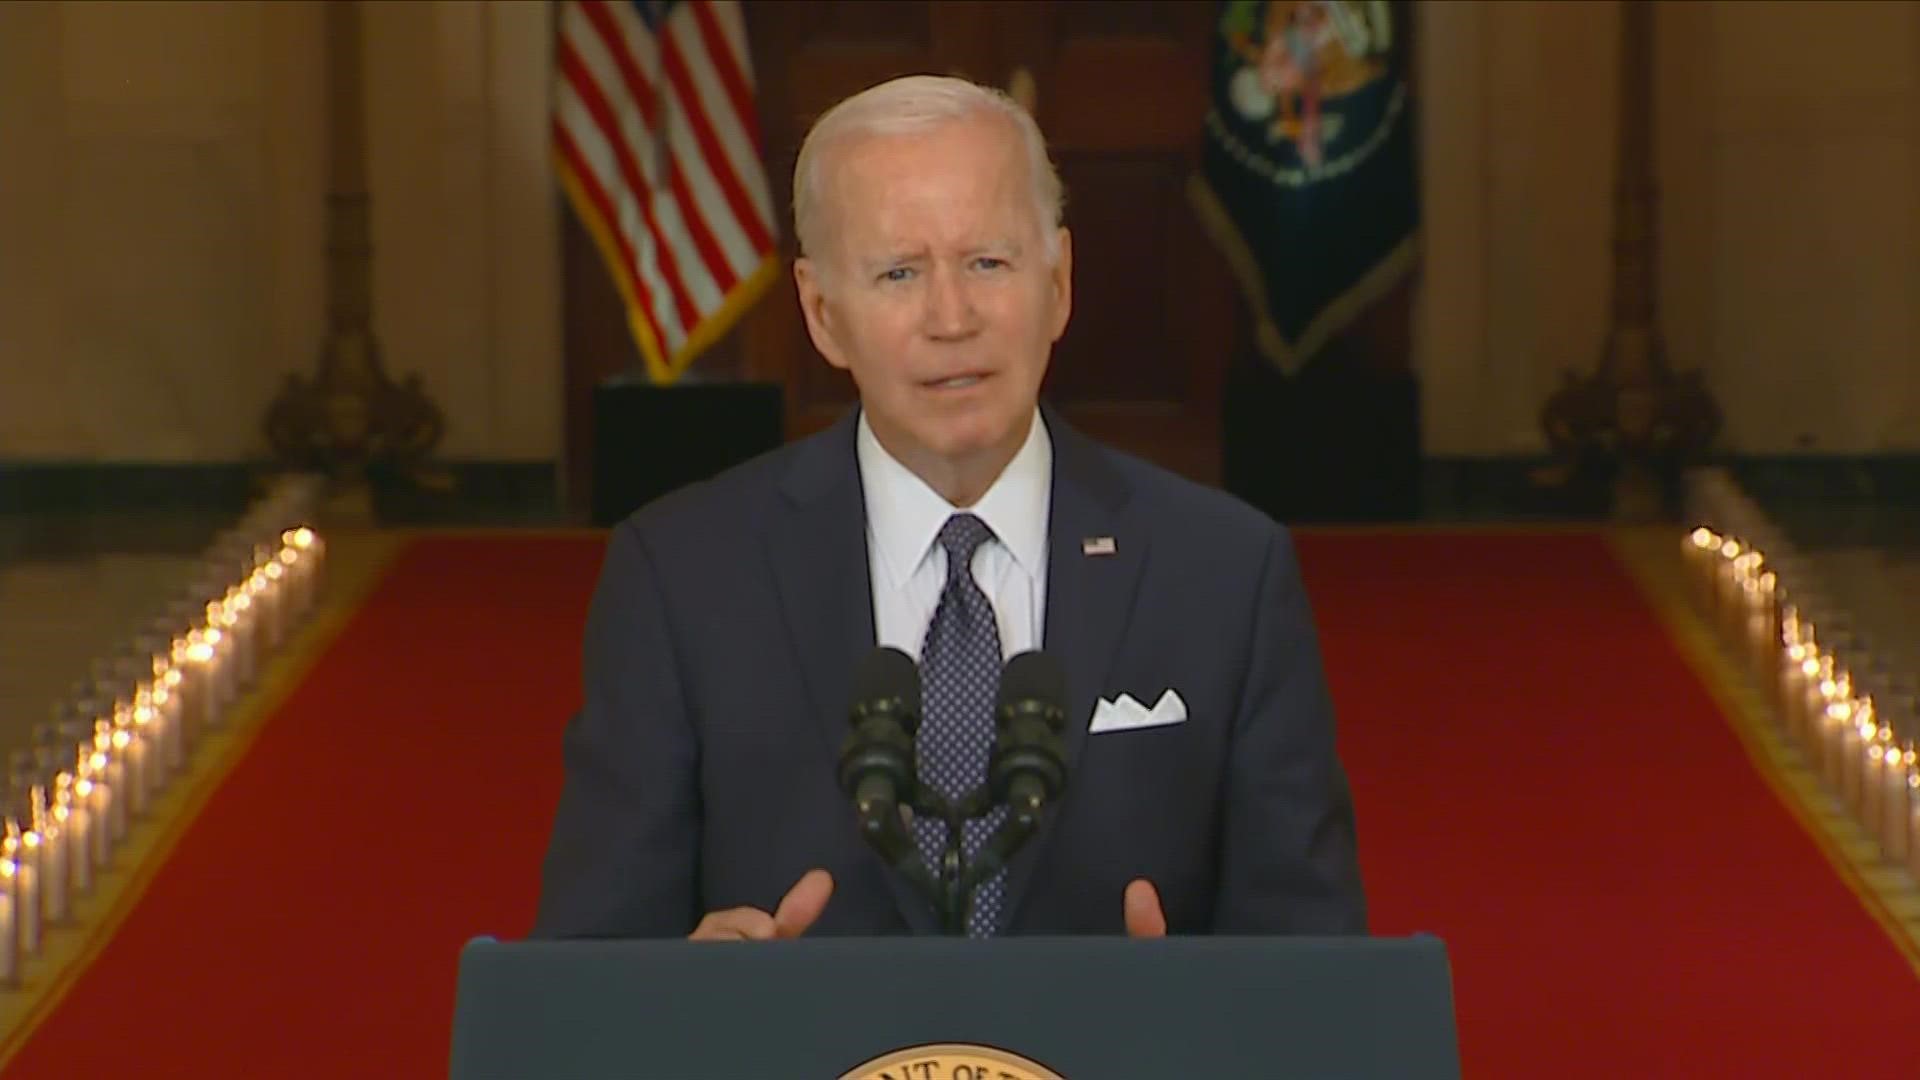 President Joe Biden said that if the U.S. is unable to ban assault weapons, than at the very least the legal age to buy one should be raised to 21.